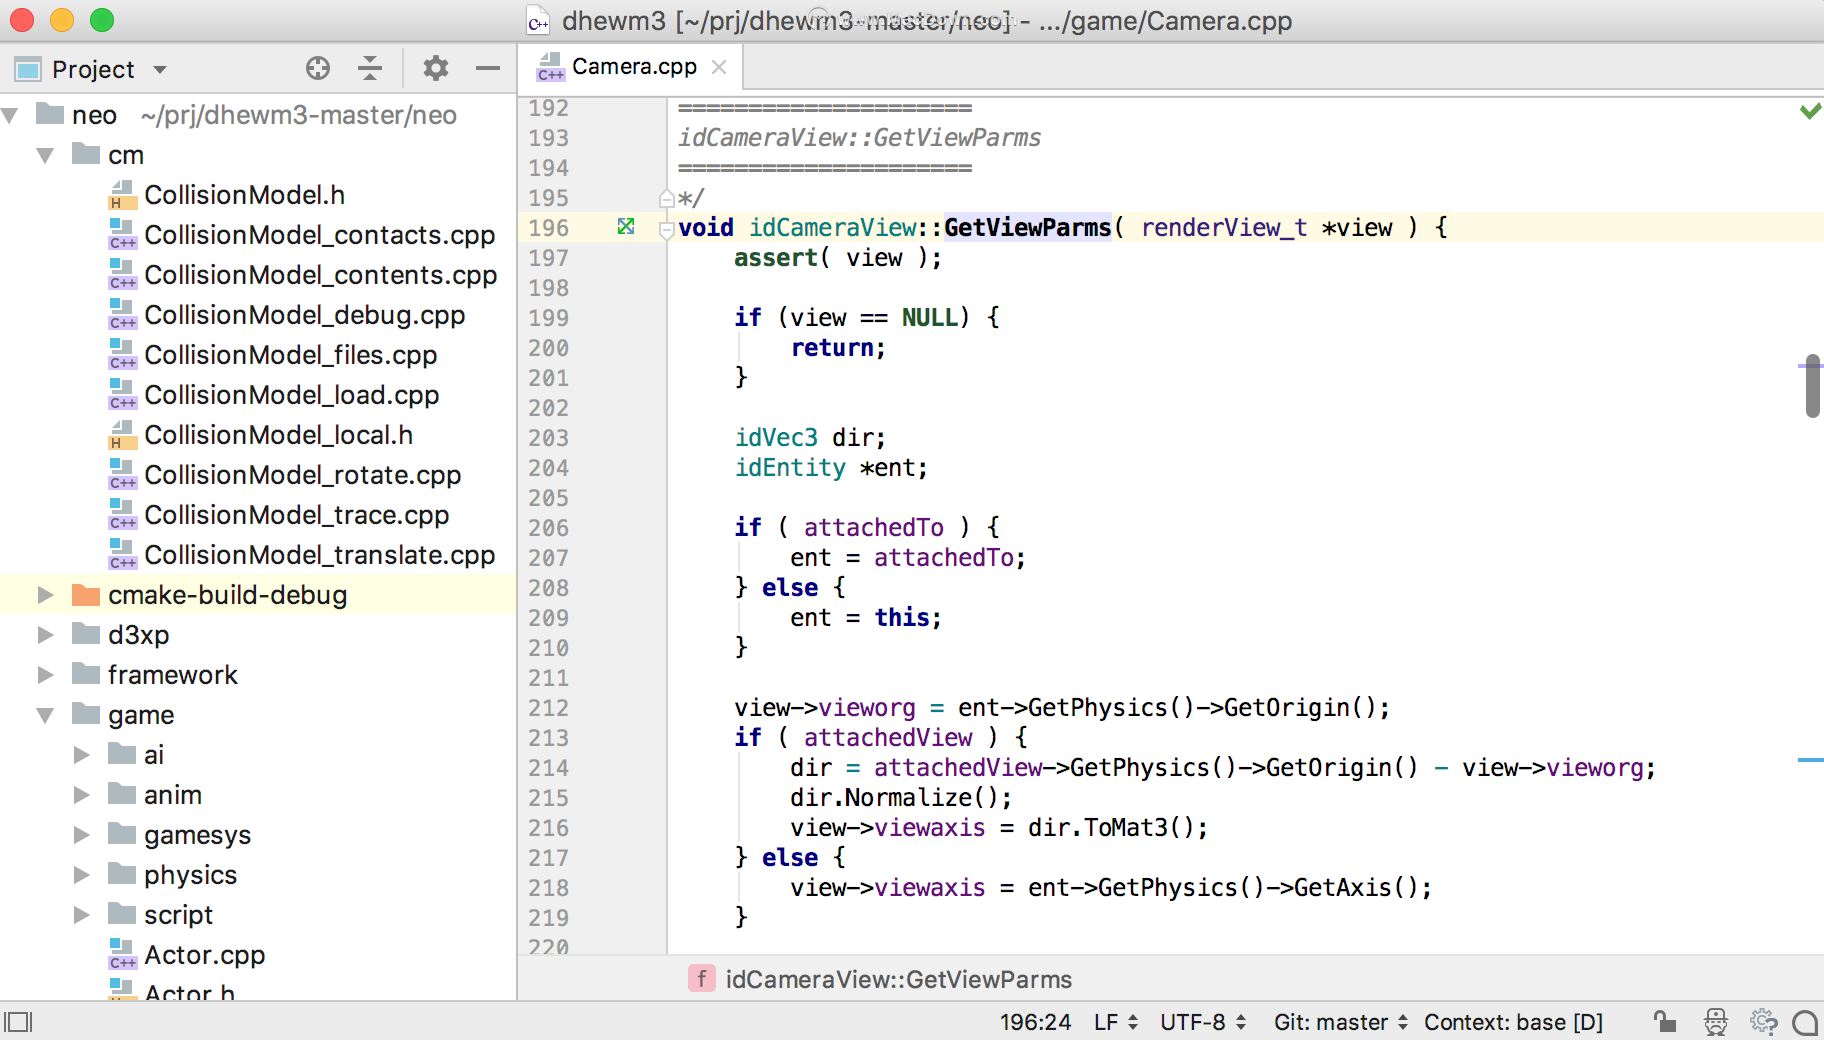 clion for mac